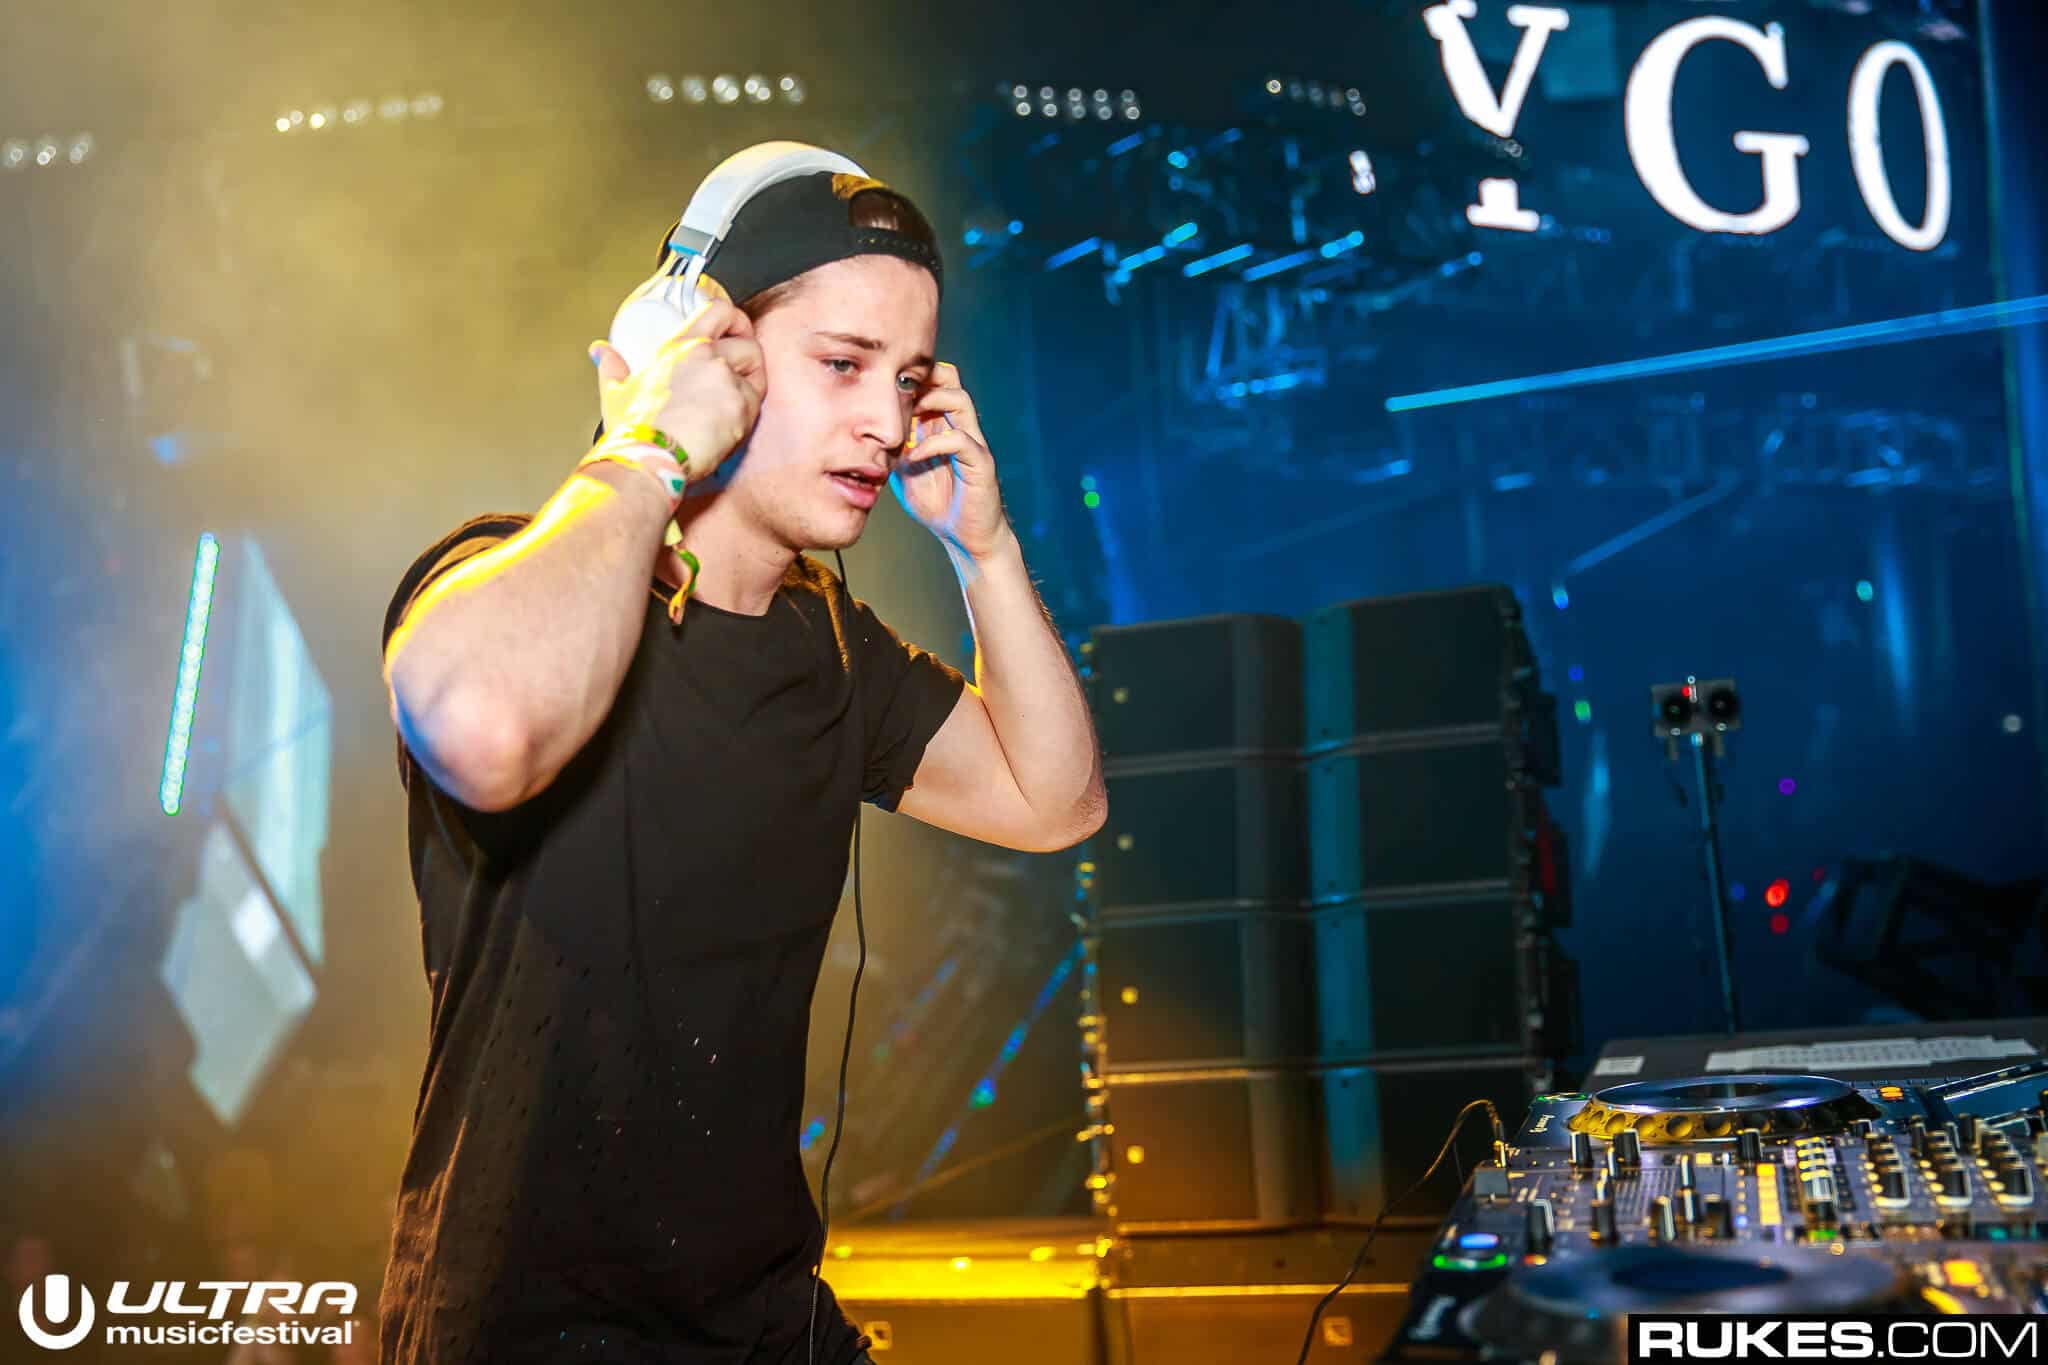 Kygo enlists Dean Lewis for another new summer hit ‘Lost Without You’: Listen